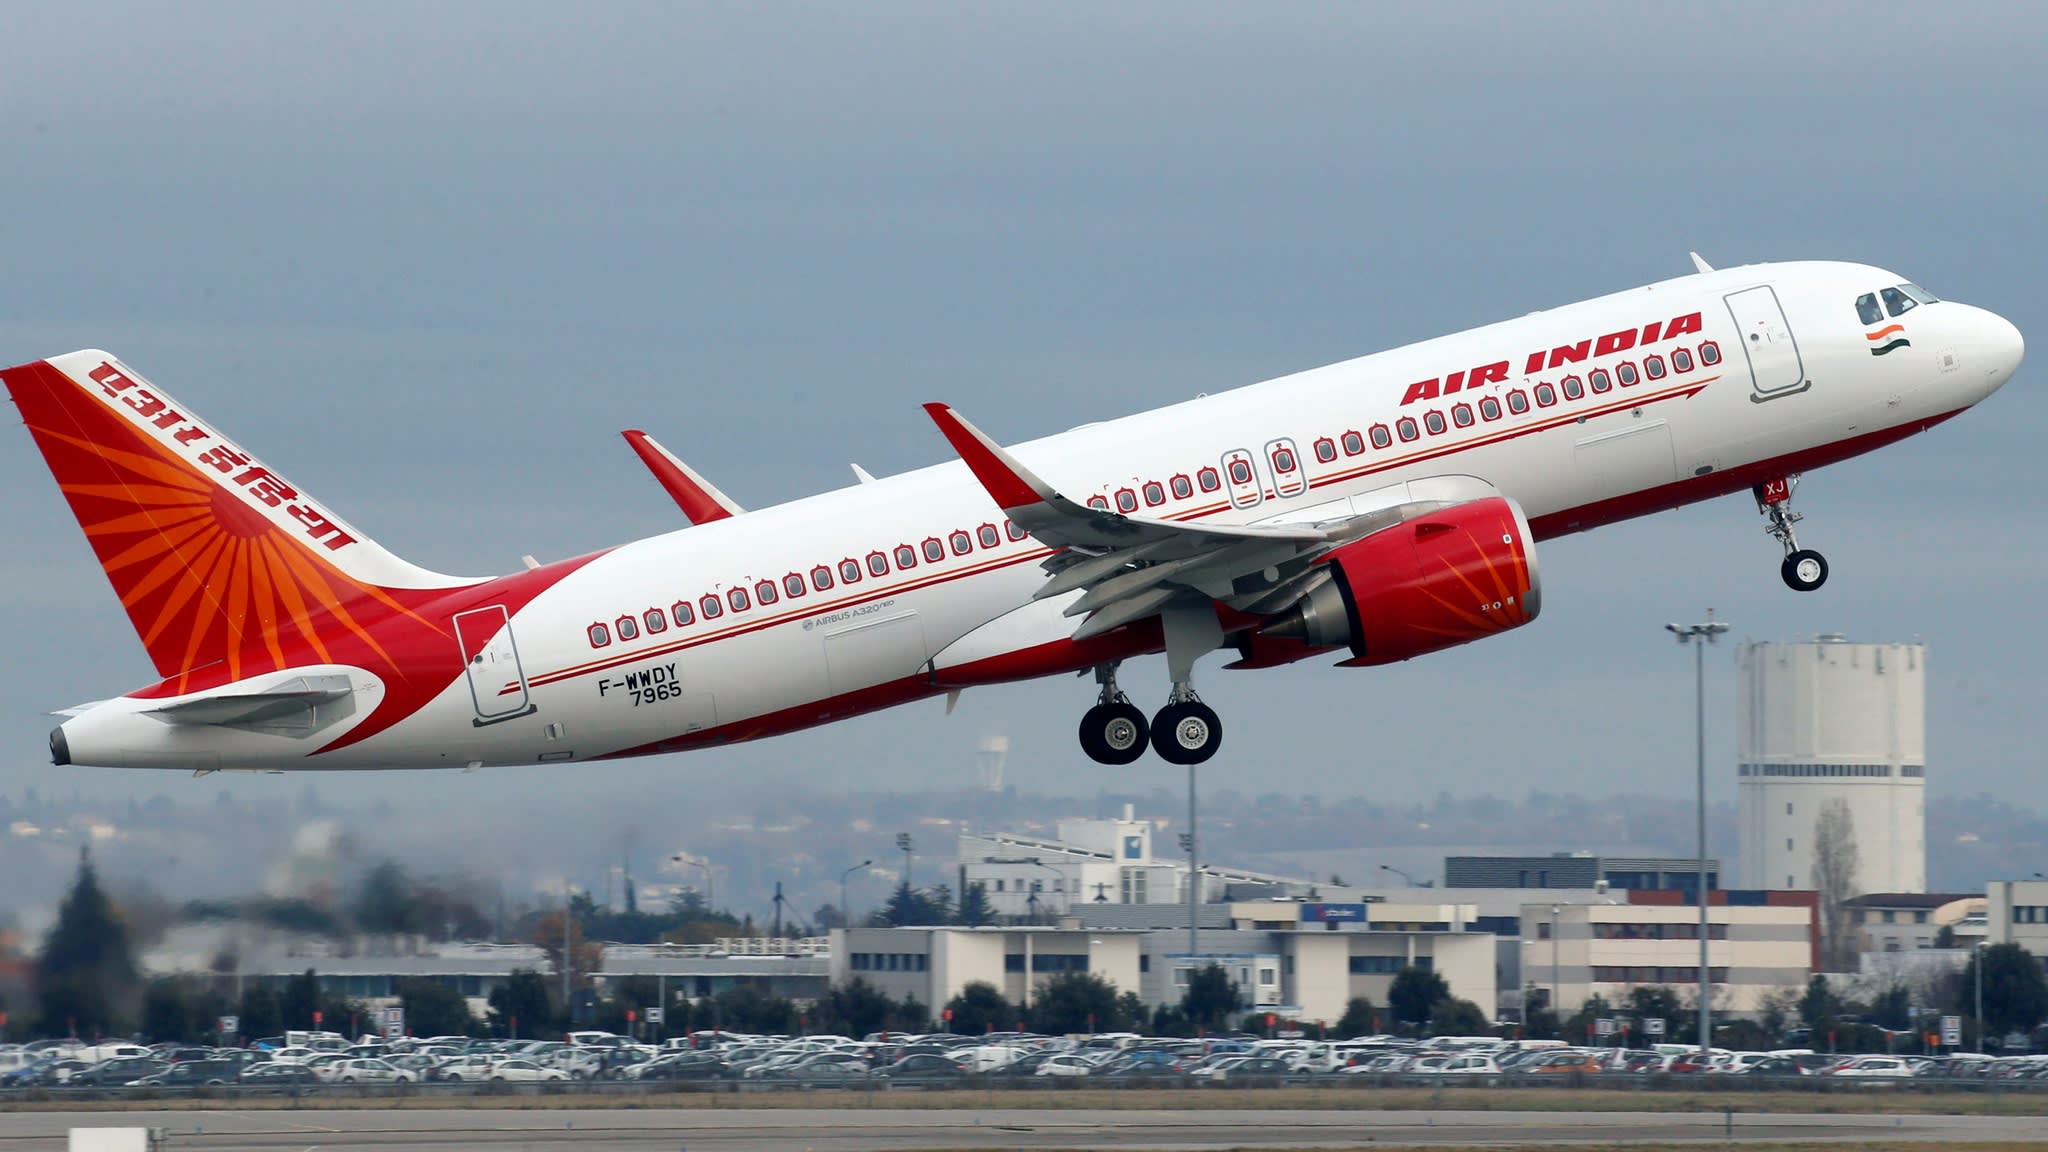 Employee Union last effort to be Air India race